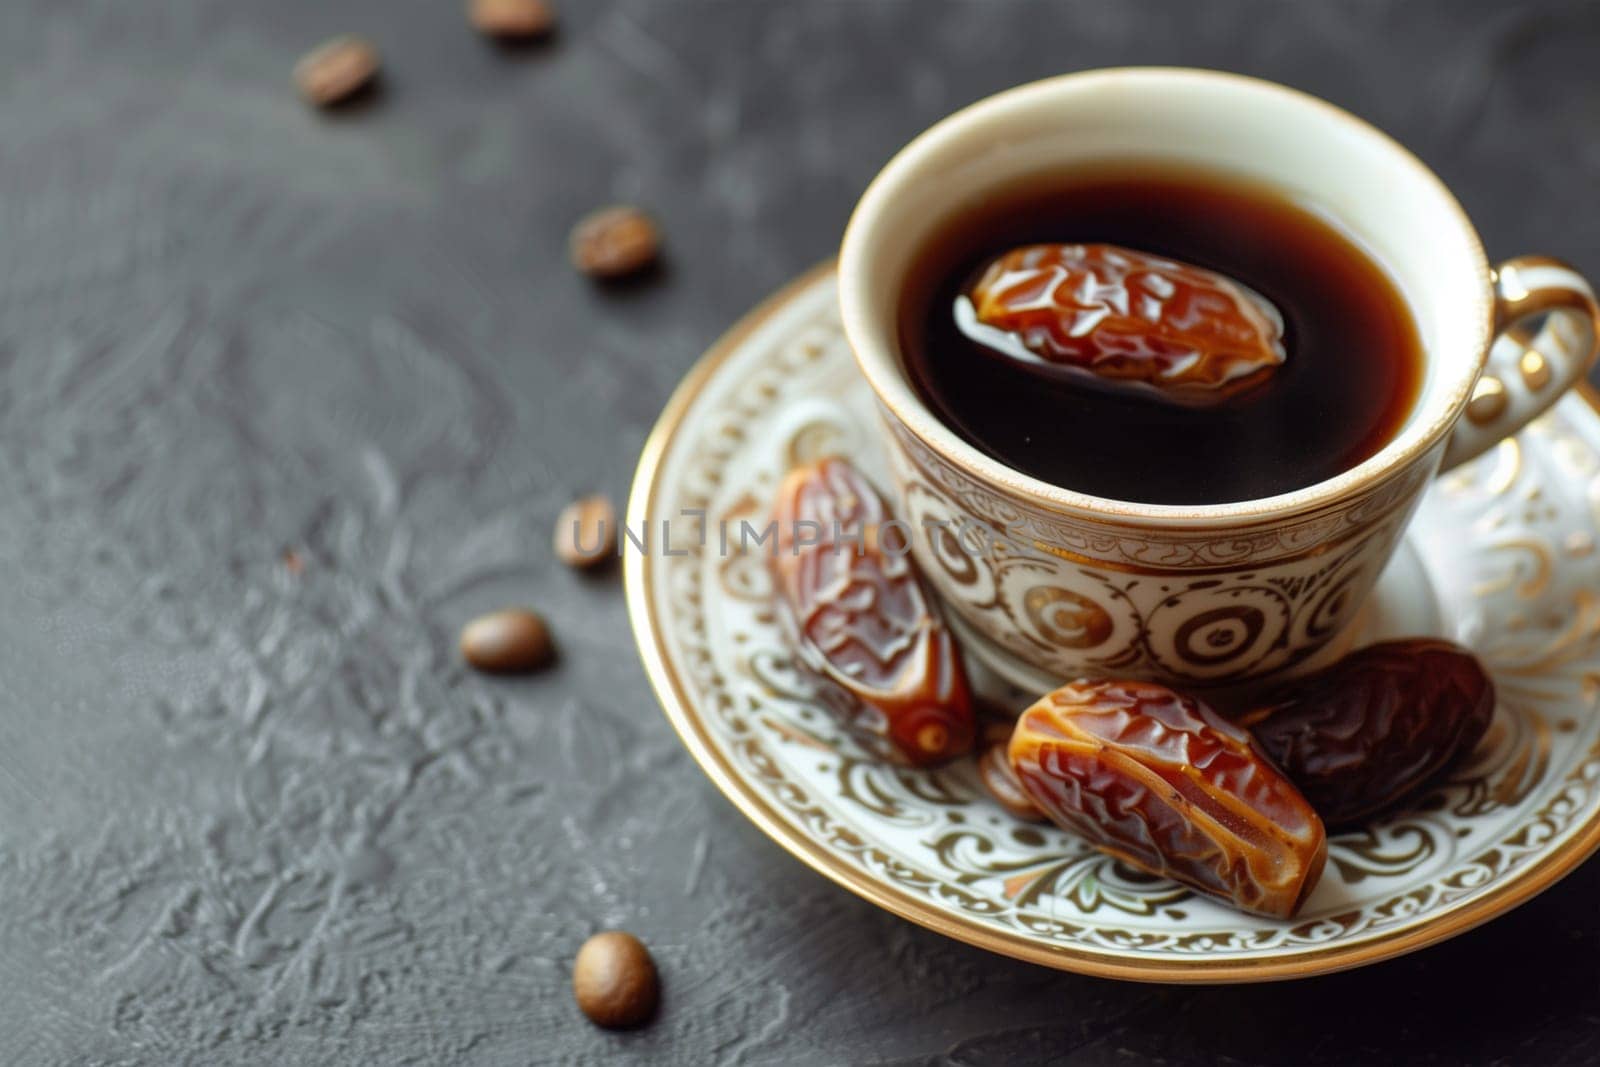 A cup of Arabic coffee accompanied by succulent dates, presented on an ornate saucer against a dark backdrop.